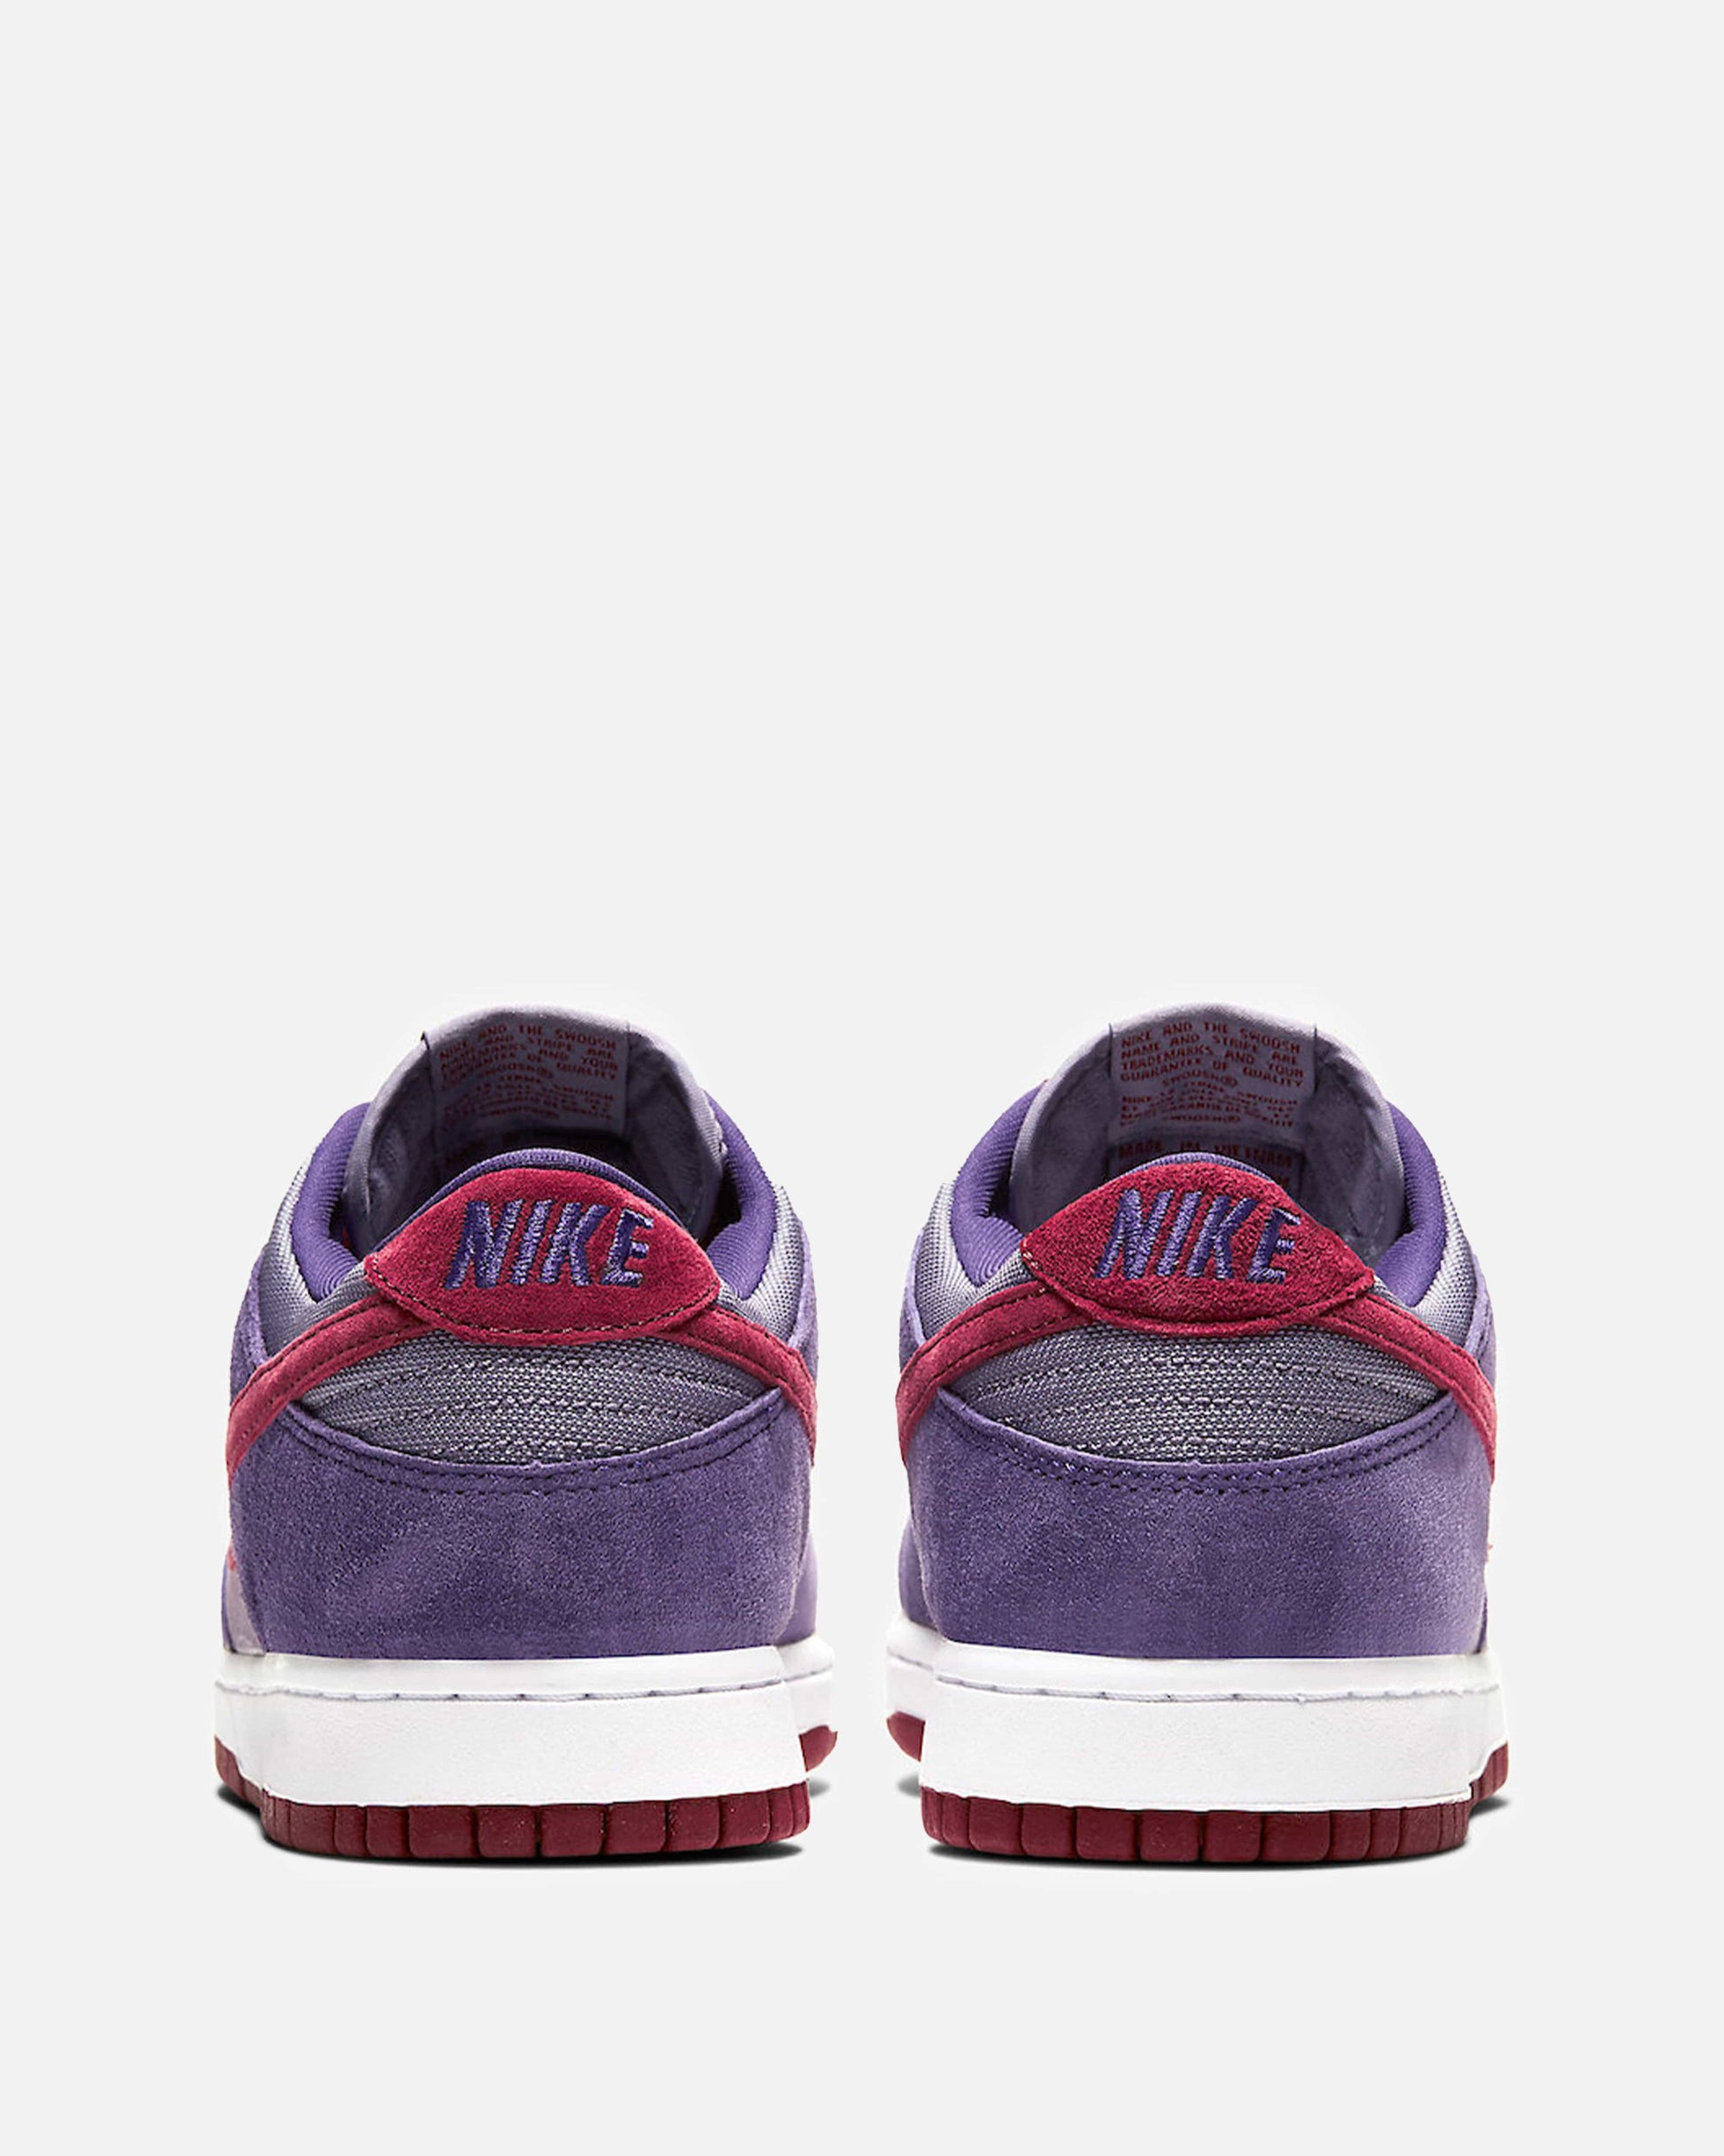 Nike Releases Dunk Low SP 'Plum'